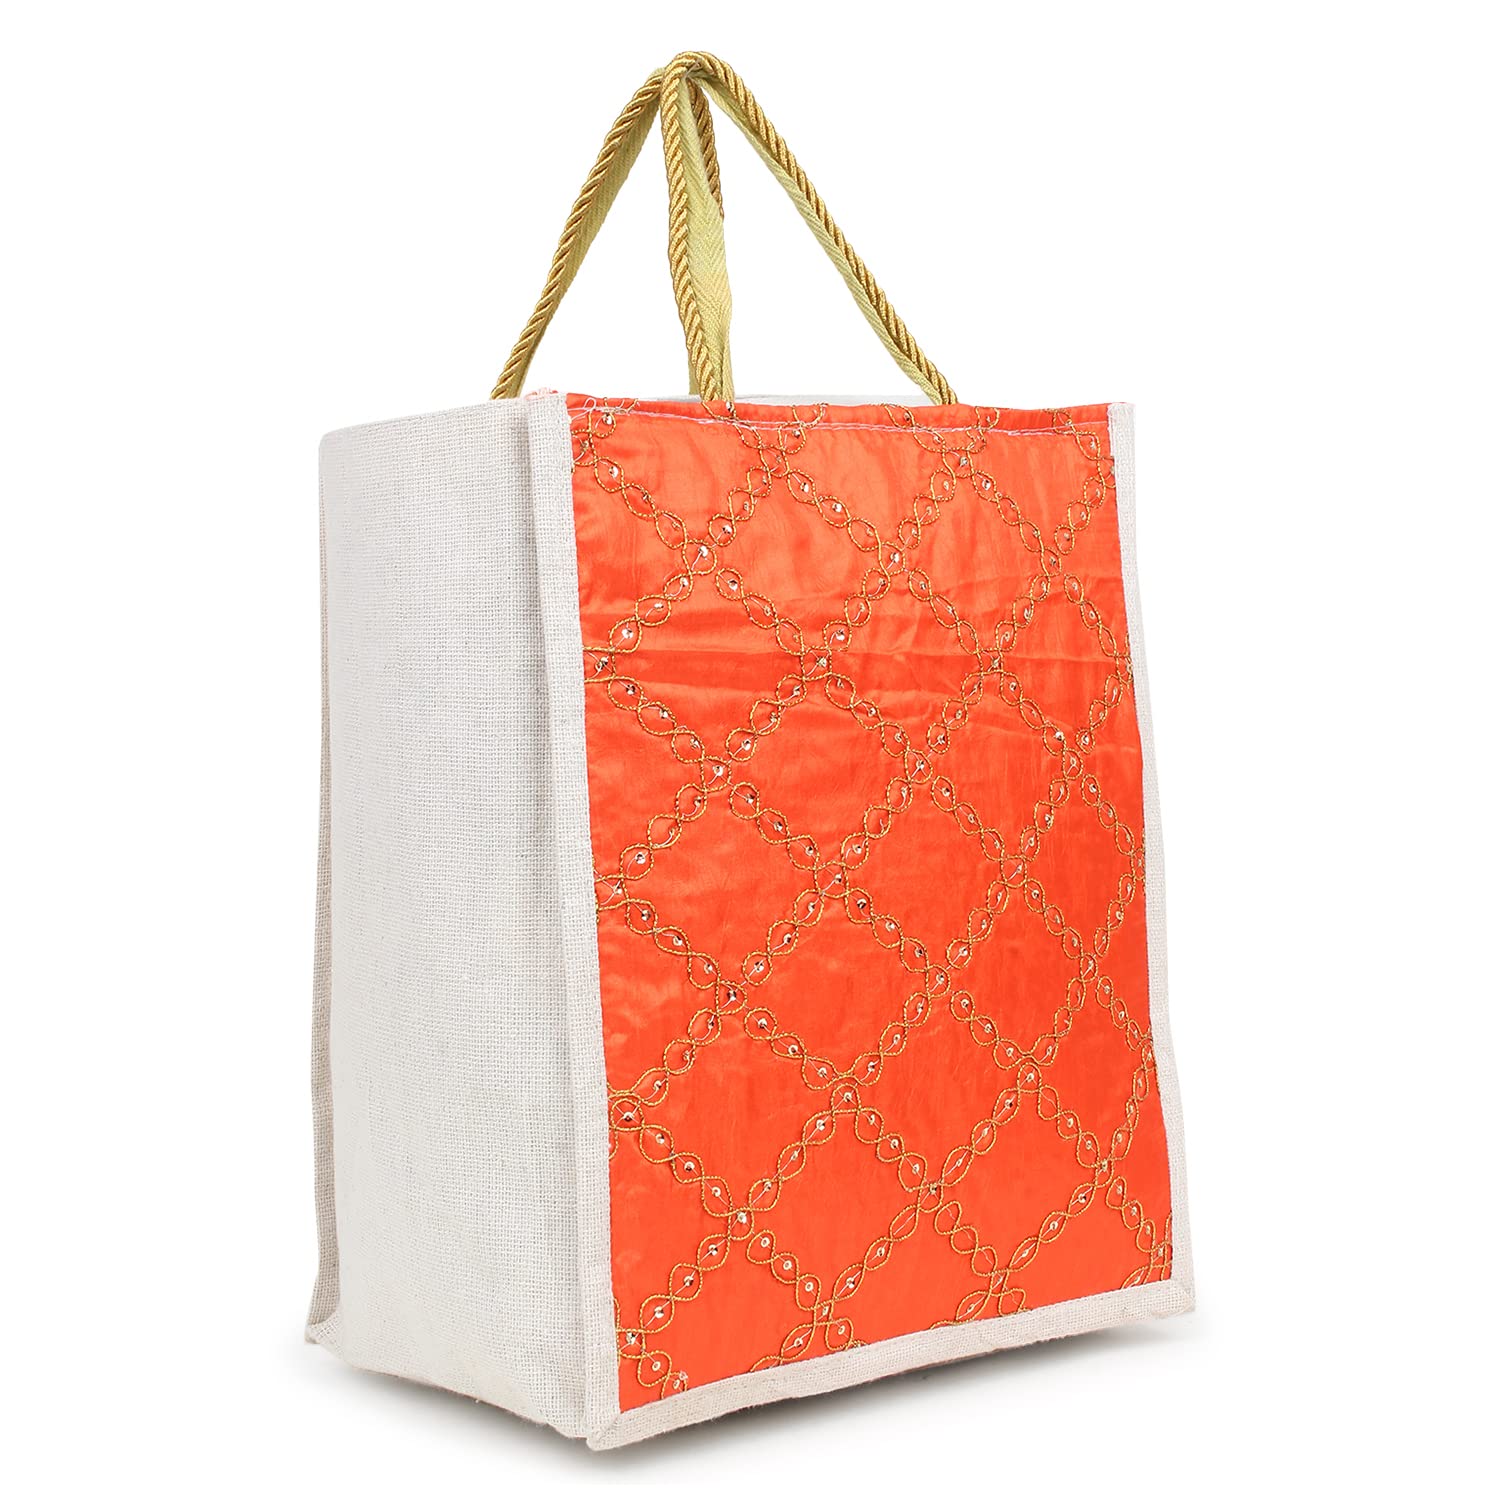 Jute Bags For Carrying Lunch - OrumIndicus